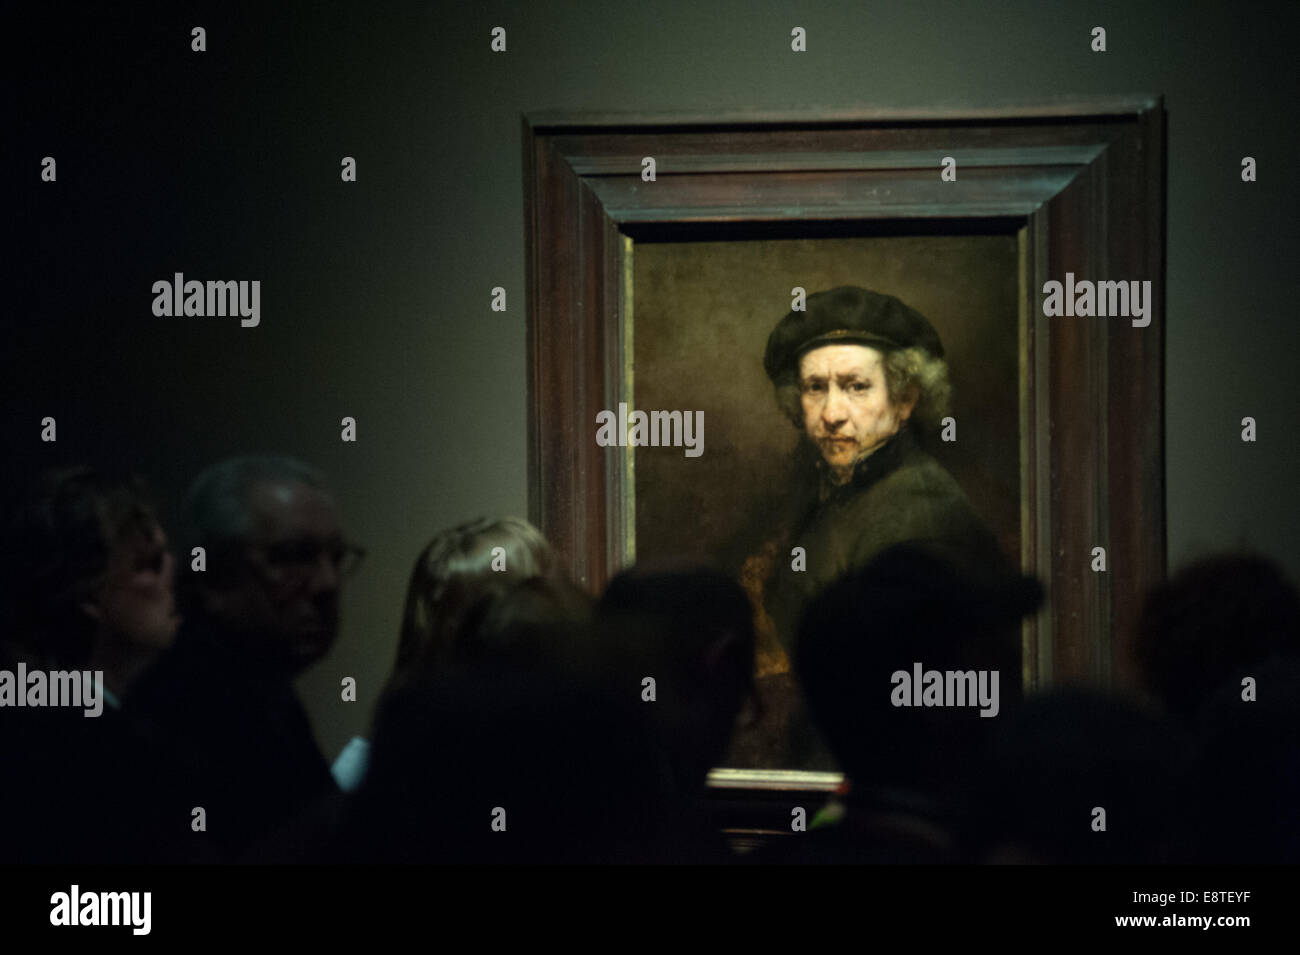 London, UK - 14 October 2014: people look at 'Self Portrait, 1659' during the press view of ‘Rembrandt: The Late Works’ at the National Gallery opening on 15 October. © Piero Cruciatti/Alamy Live News Stock Photo